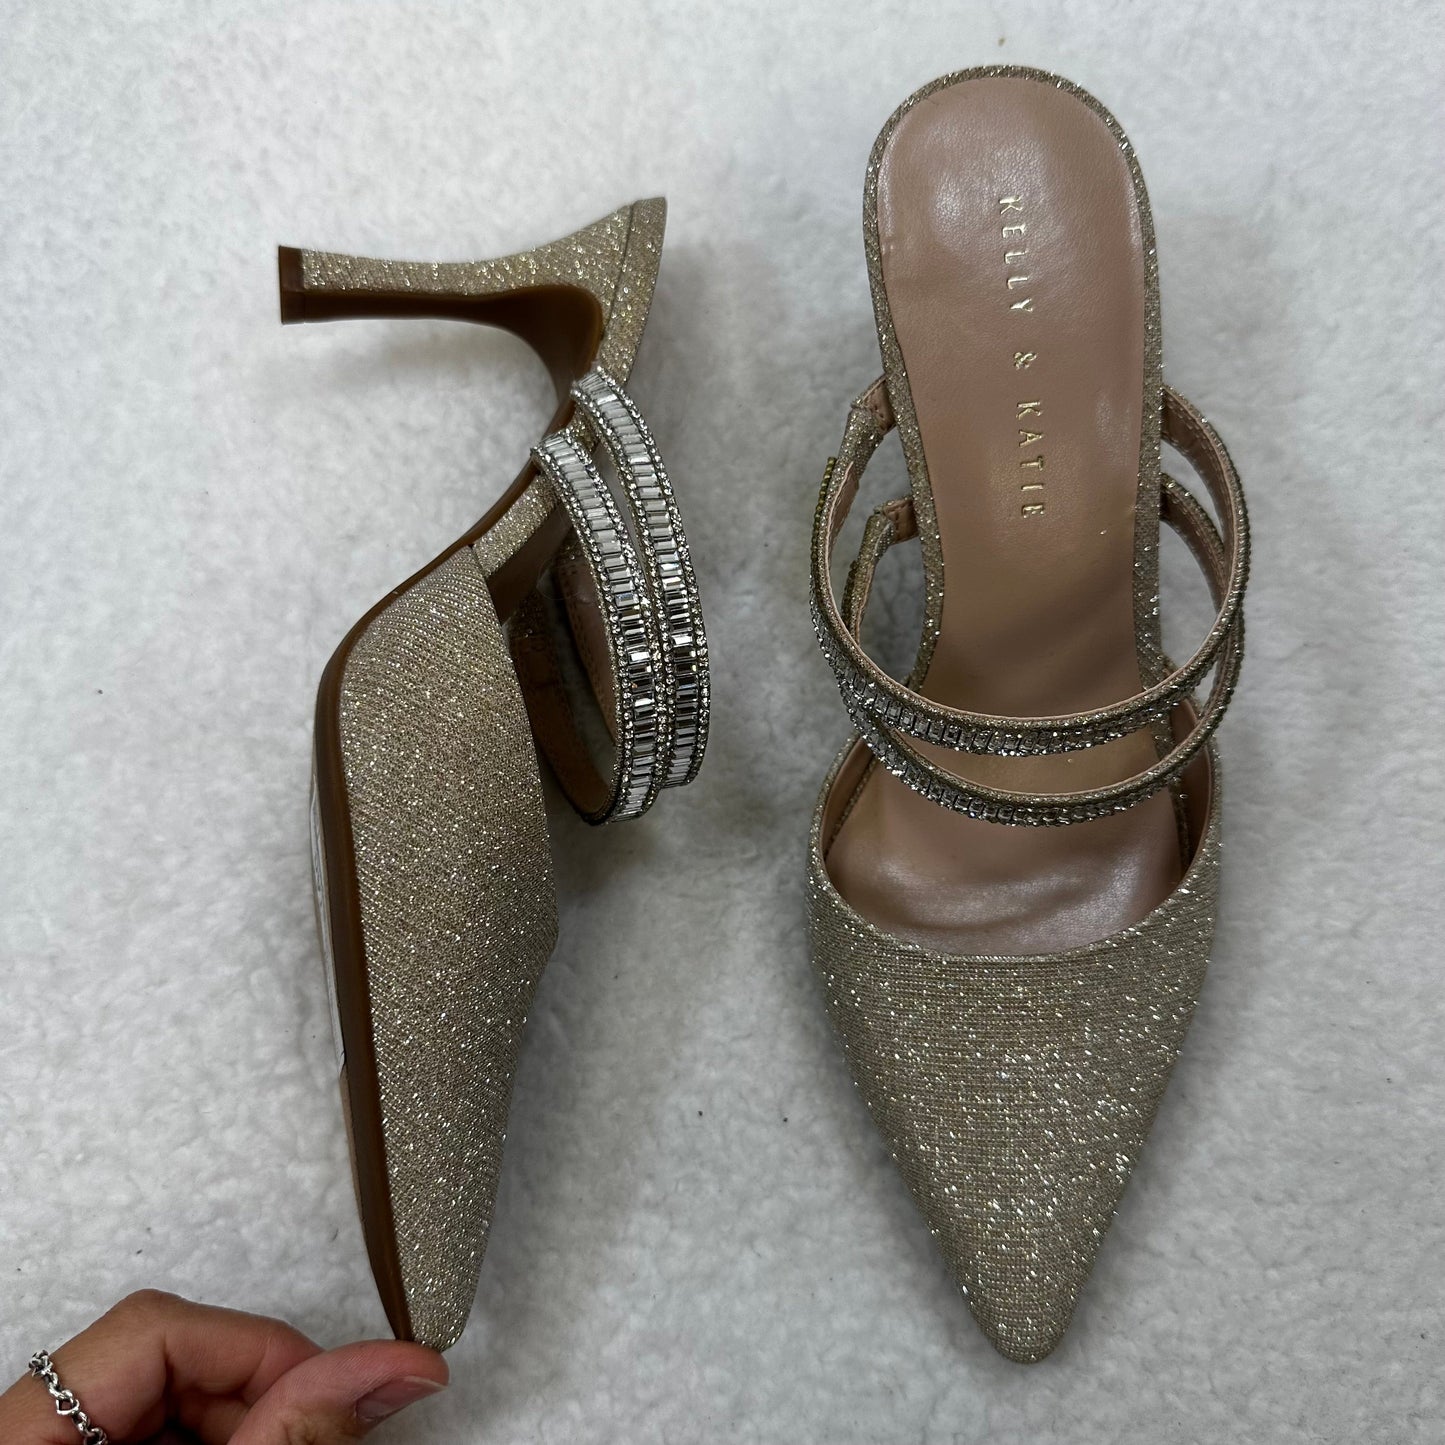 Sparkles Shoes Heels Stiletto Kelly And Katie, Size 9